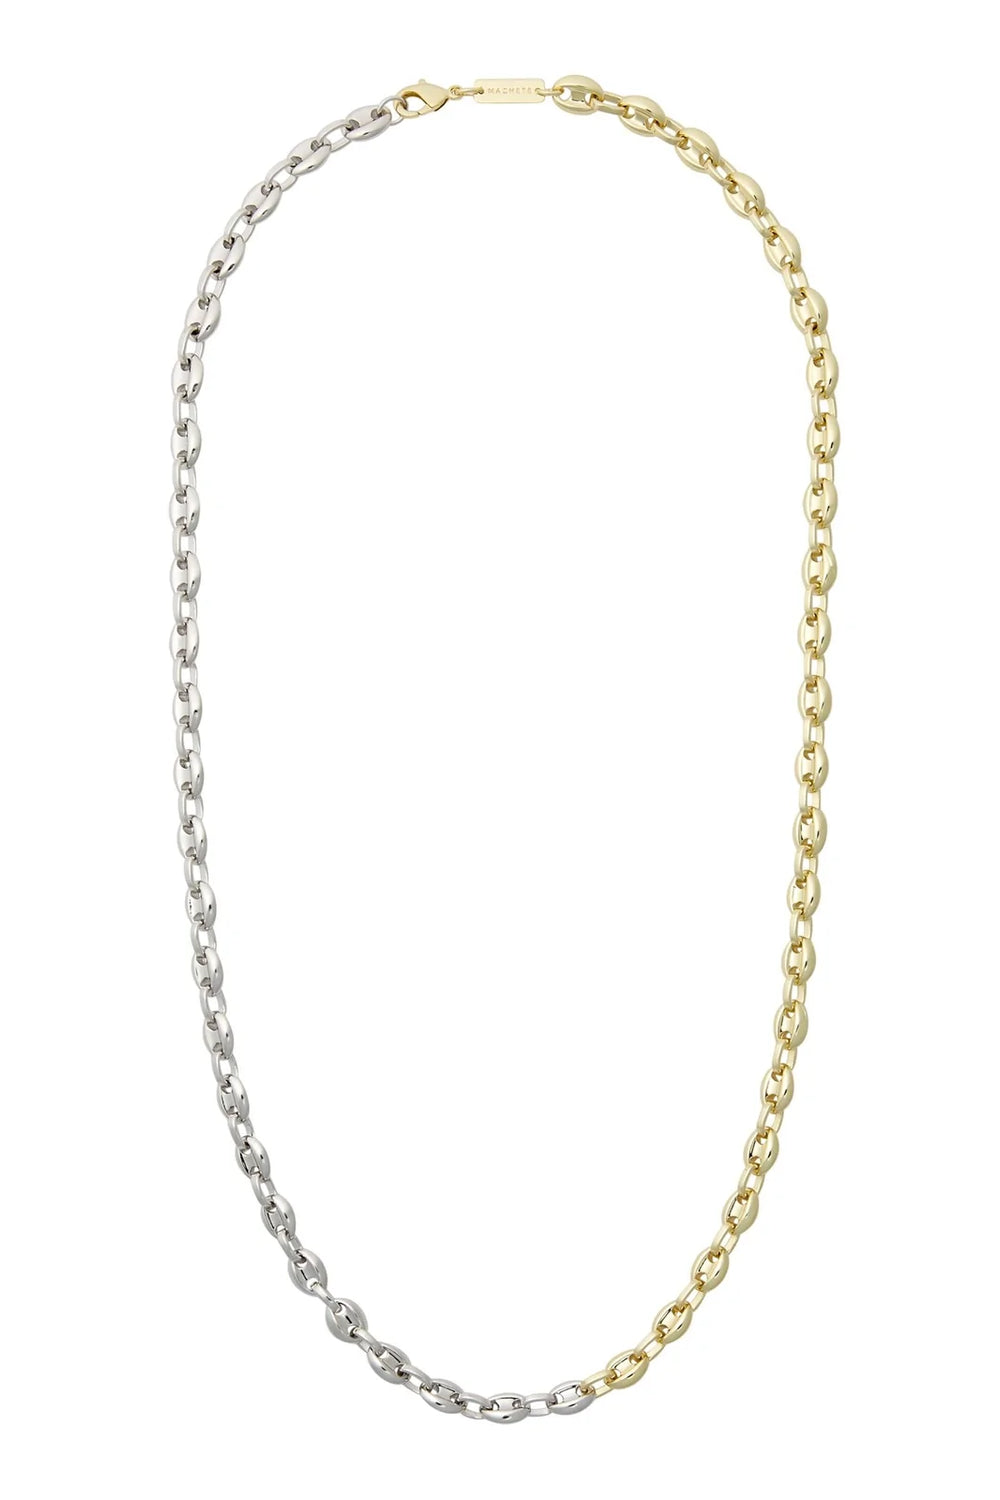 Machete Coffee Bead Necklace in Gold + Silver 18